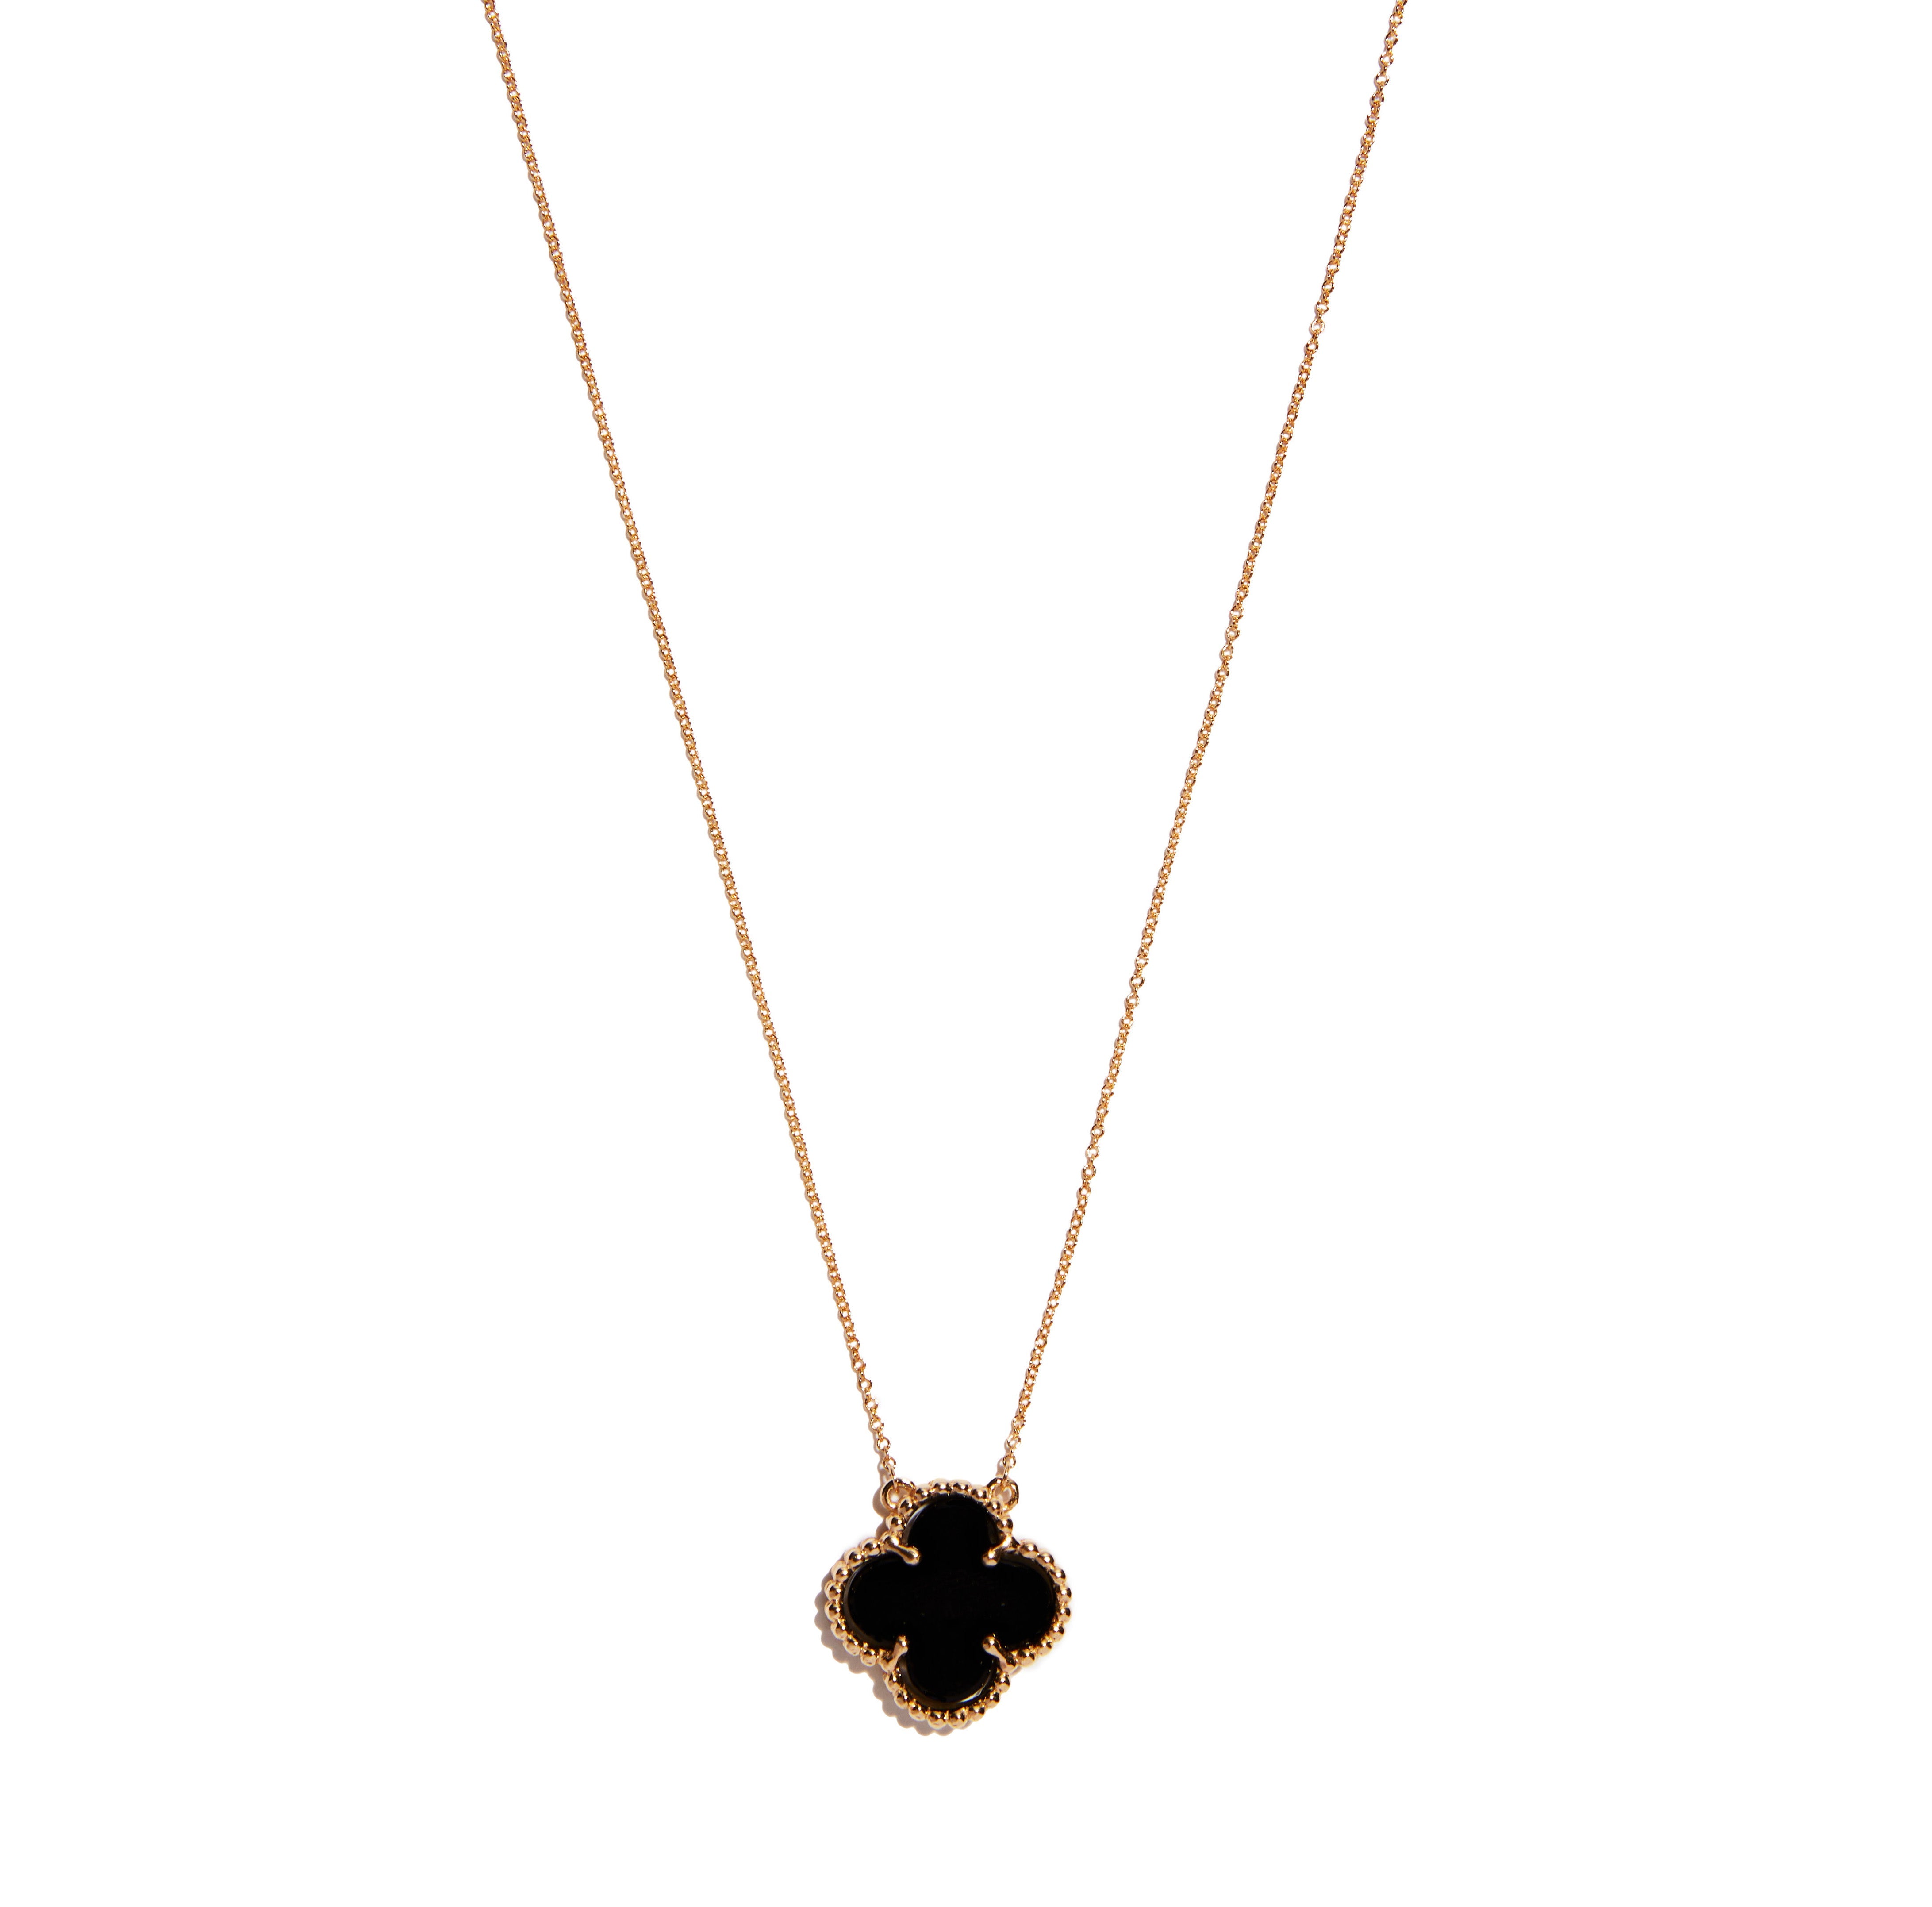 Enhance your look with the 9 carat yellow gold onyx clover pendant. This striking accessory features a captivating clover design crafted from sleek onyx stone, adding a touch of elegance and mystique to any outfit. A must-have piece for your jewelry collection.